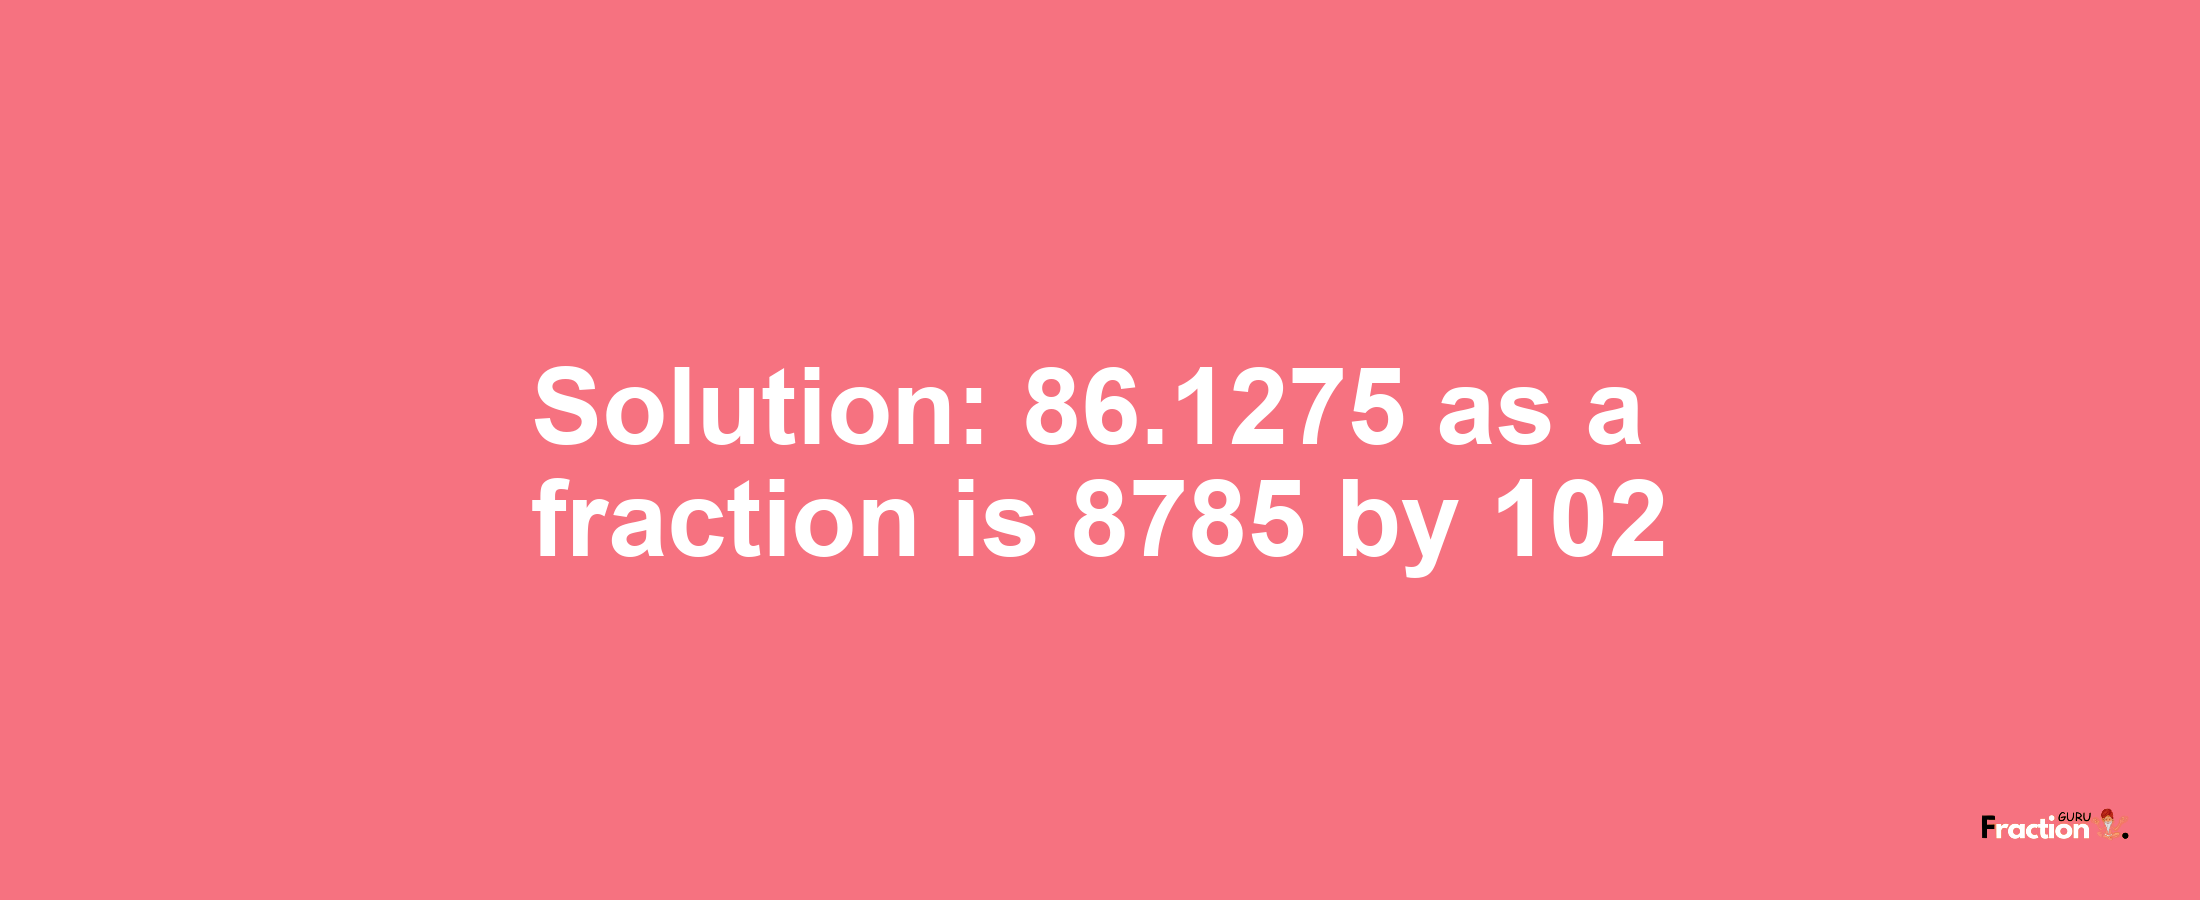 Solution:86.1275 as a fraction is 8785/102